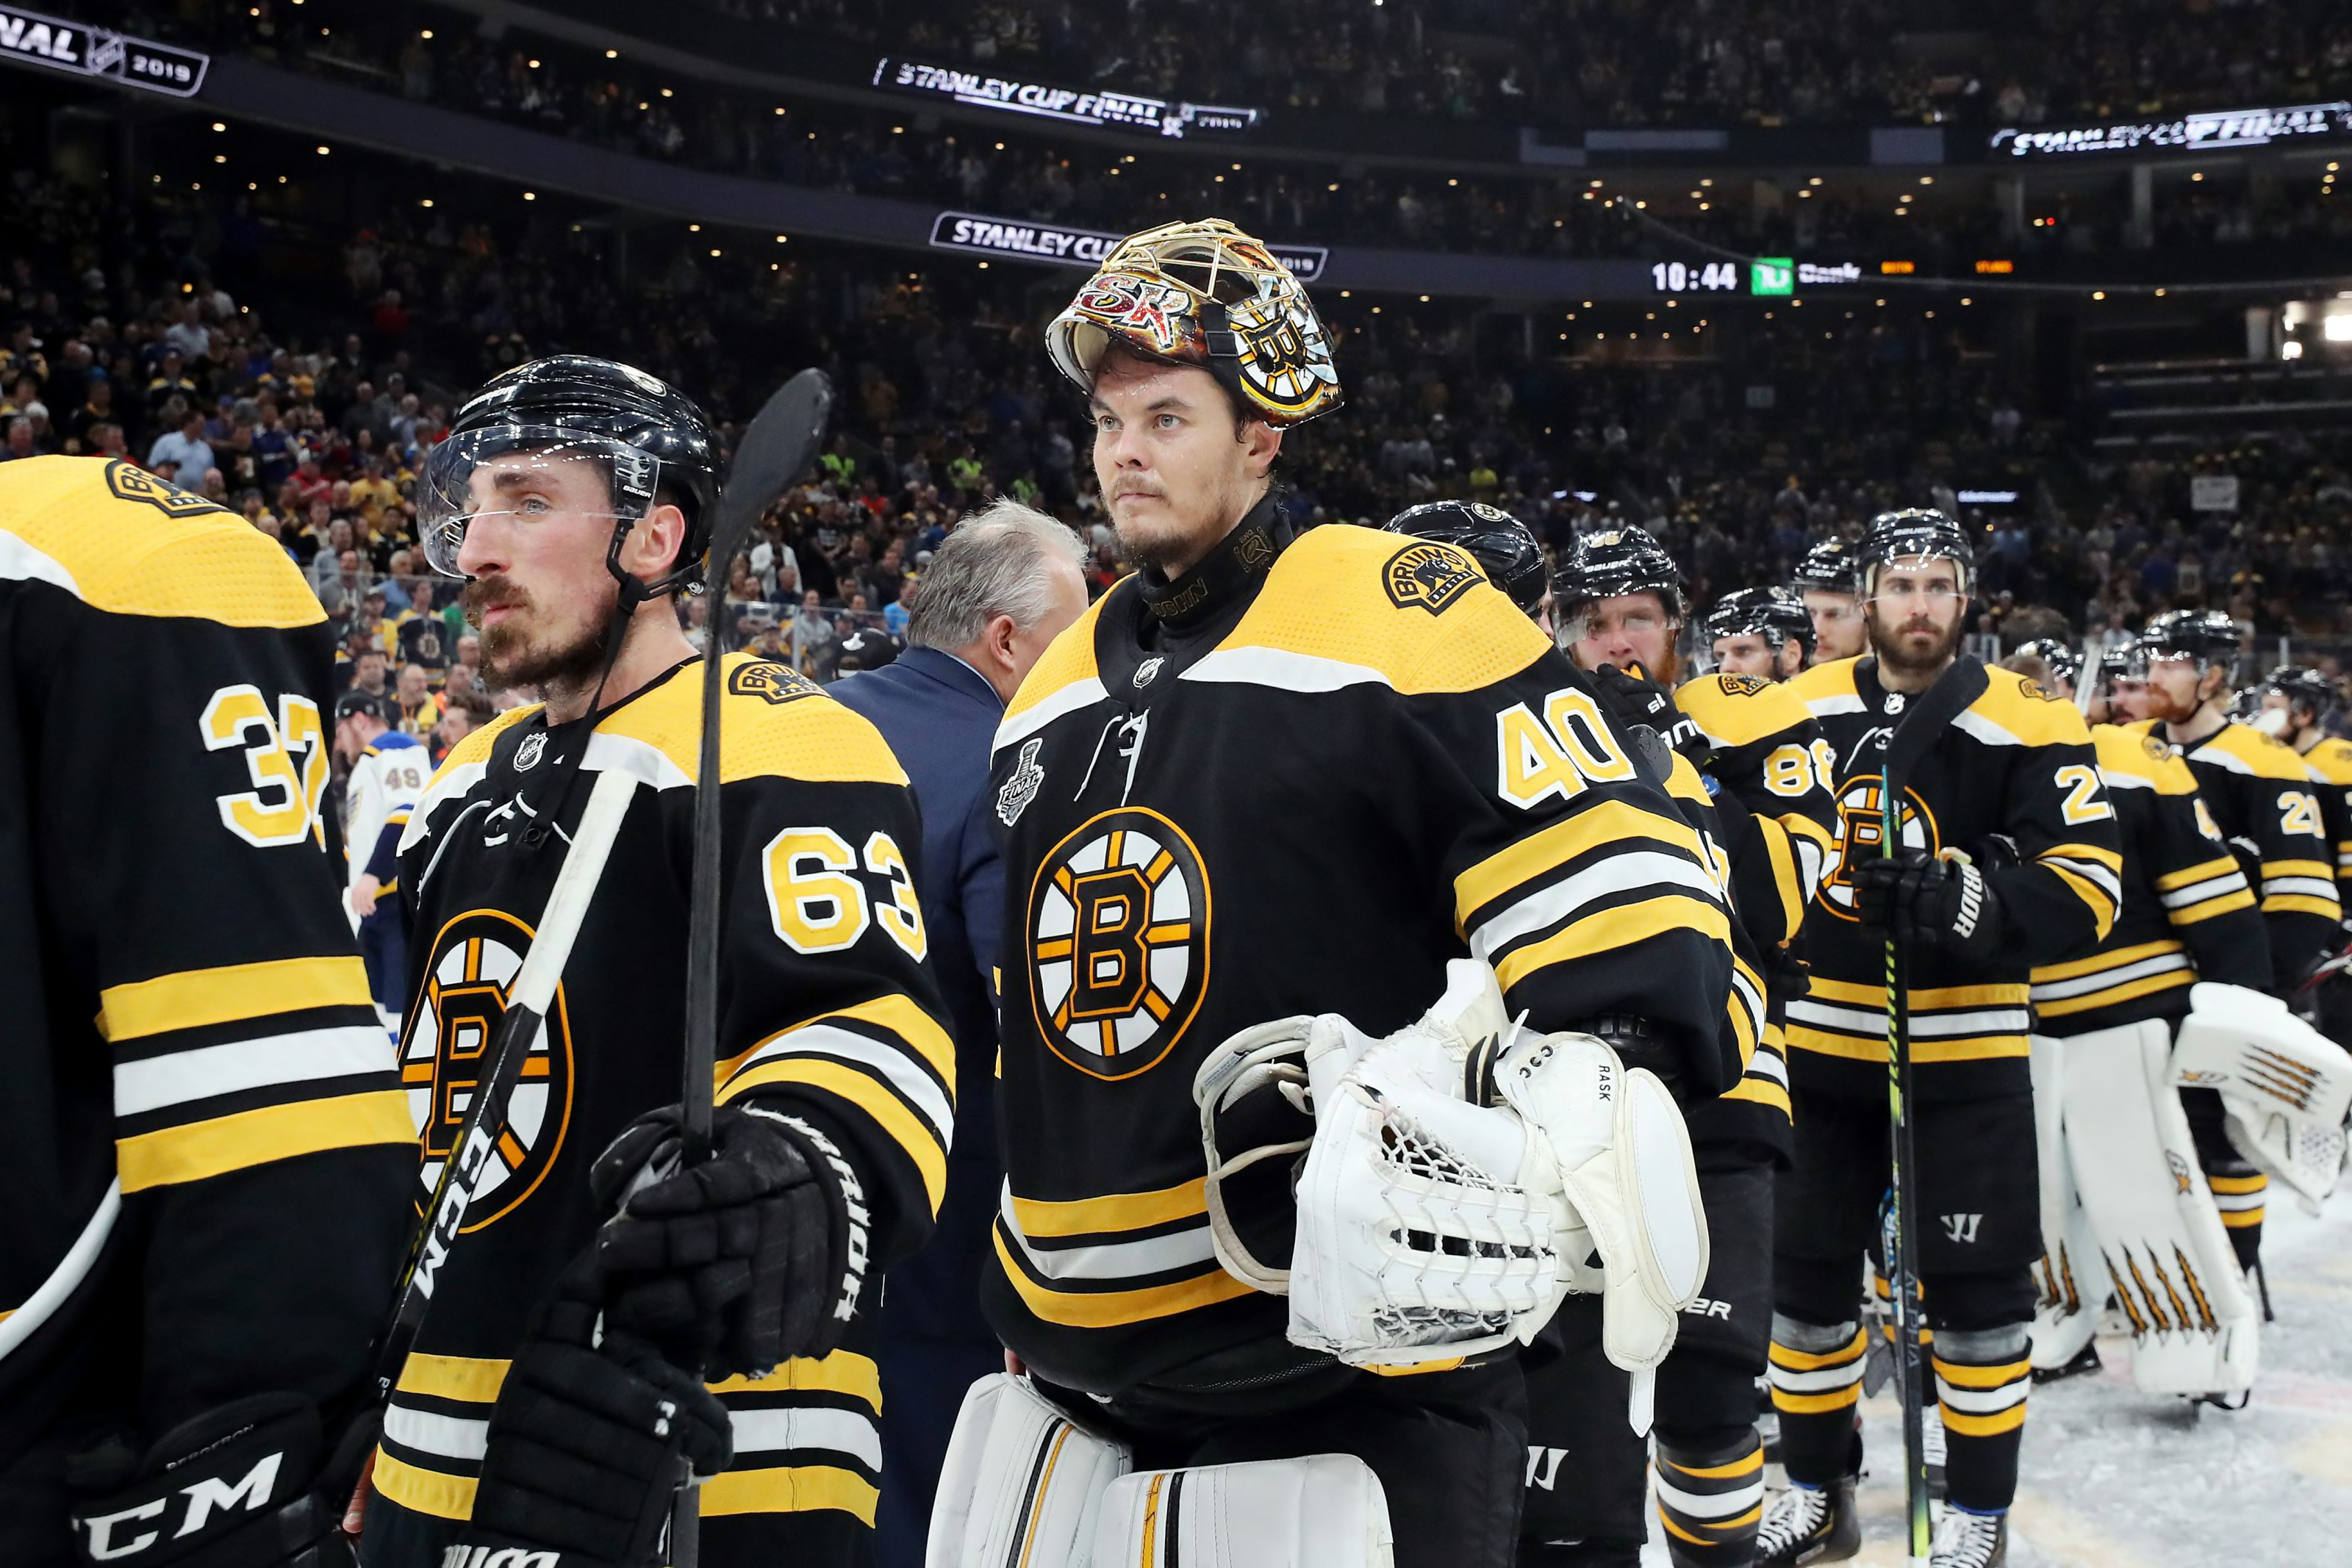 Year of parades ends in Boston with Bruins' Stanley Cup loss